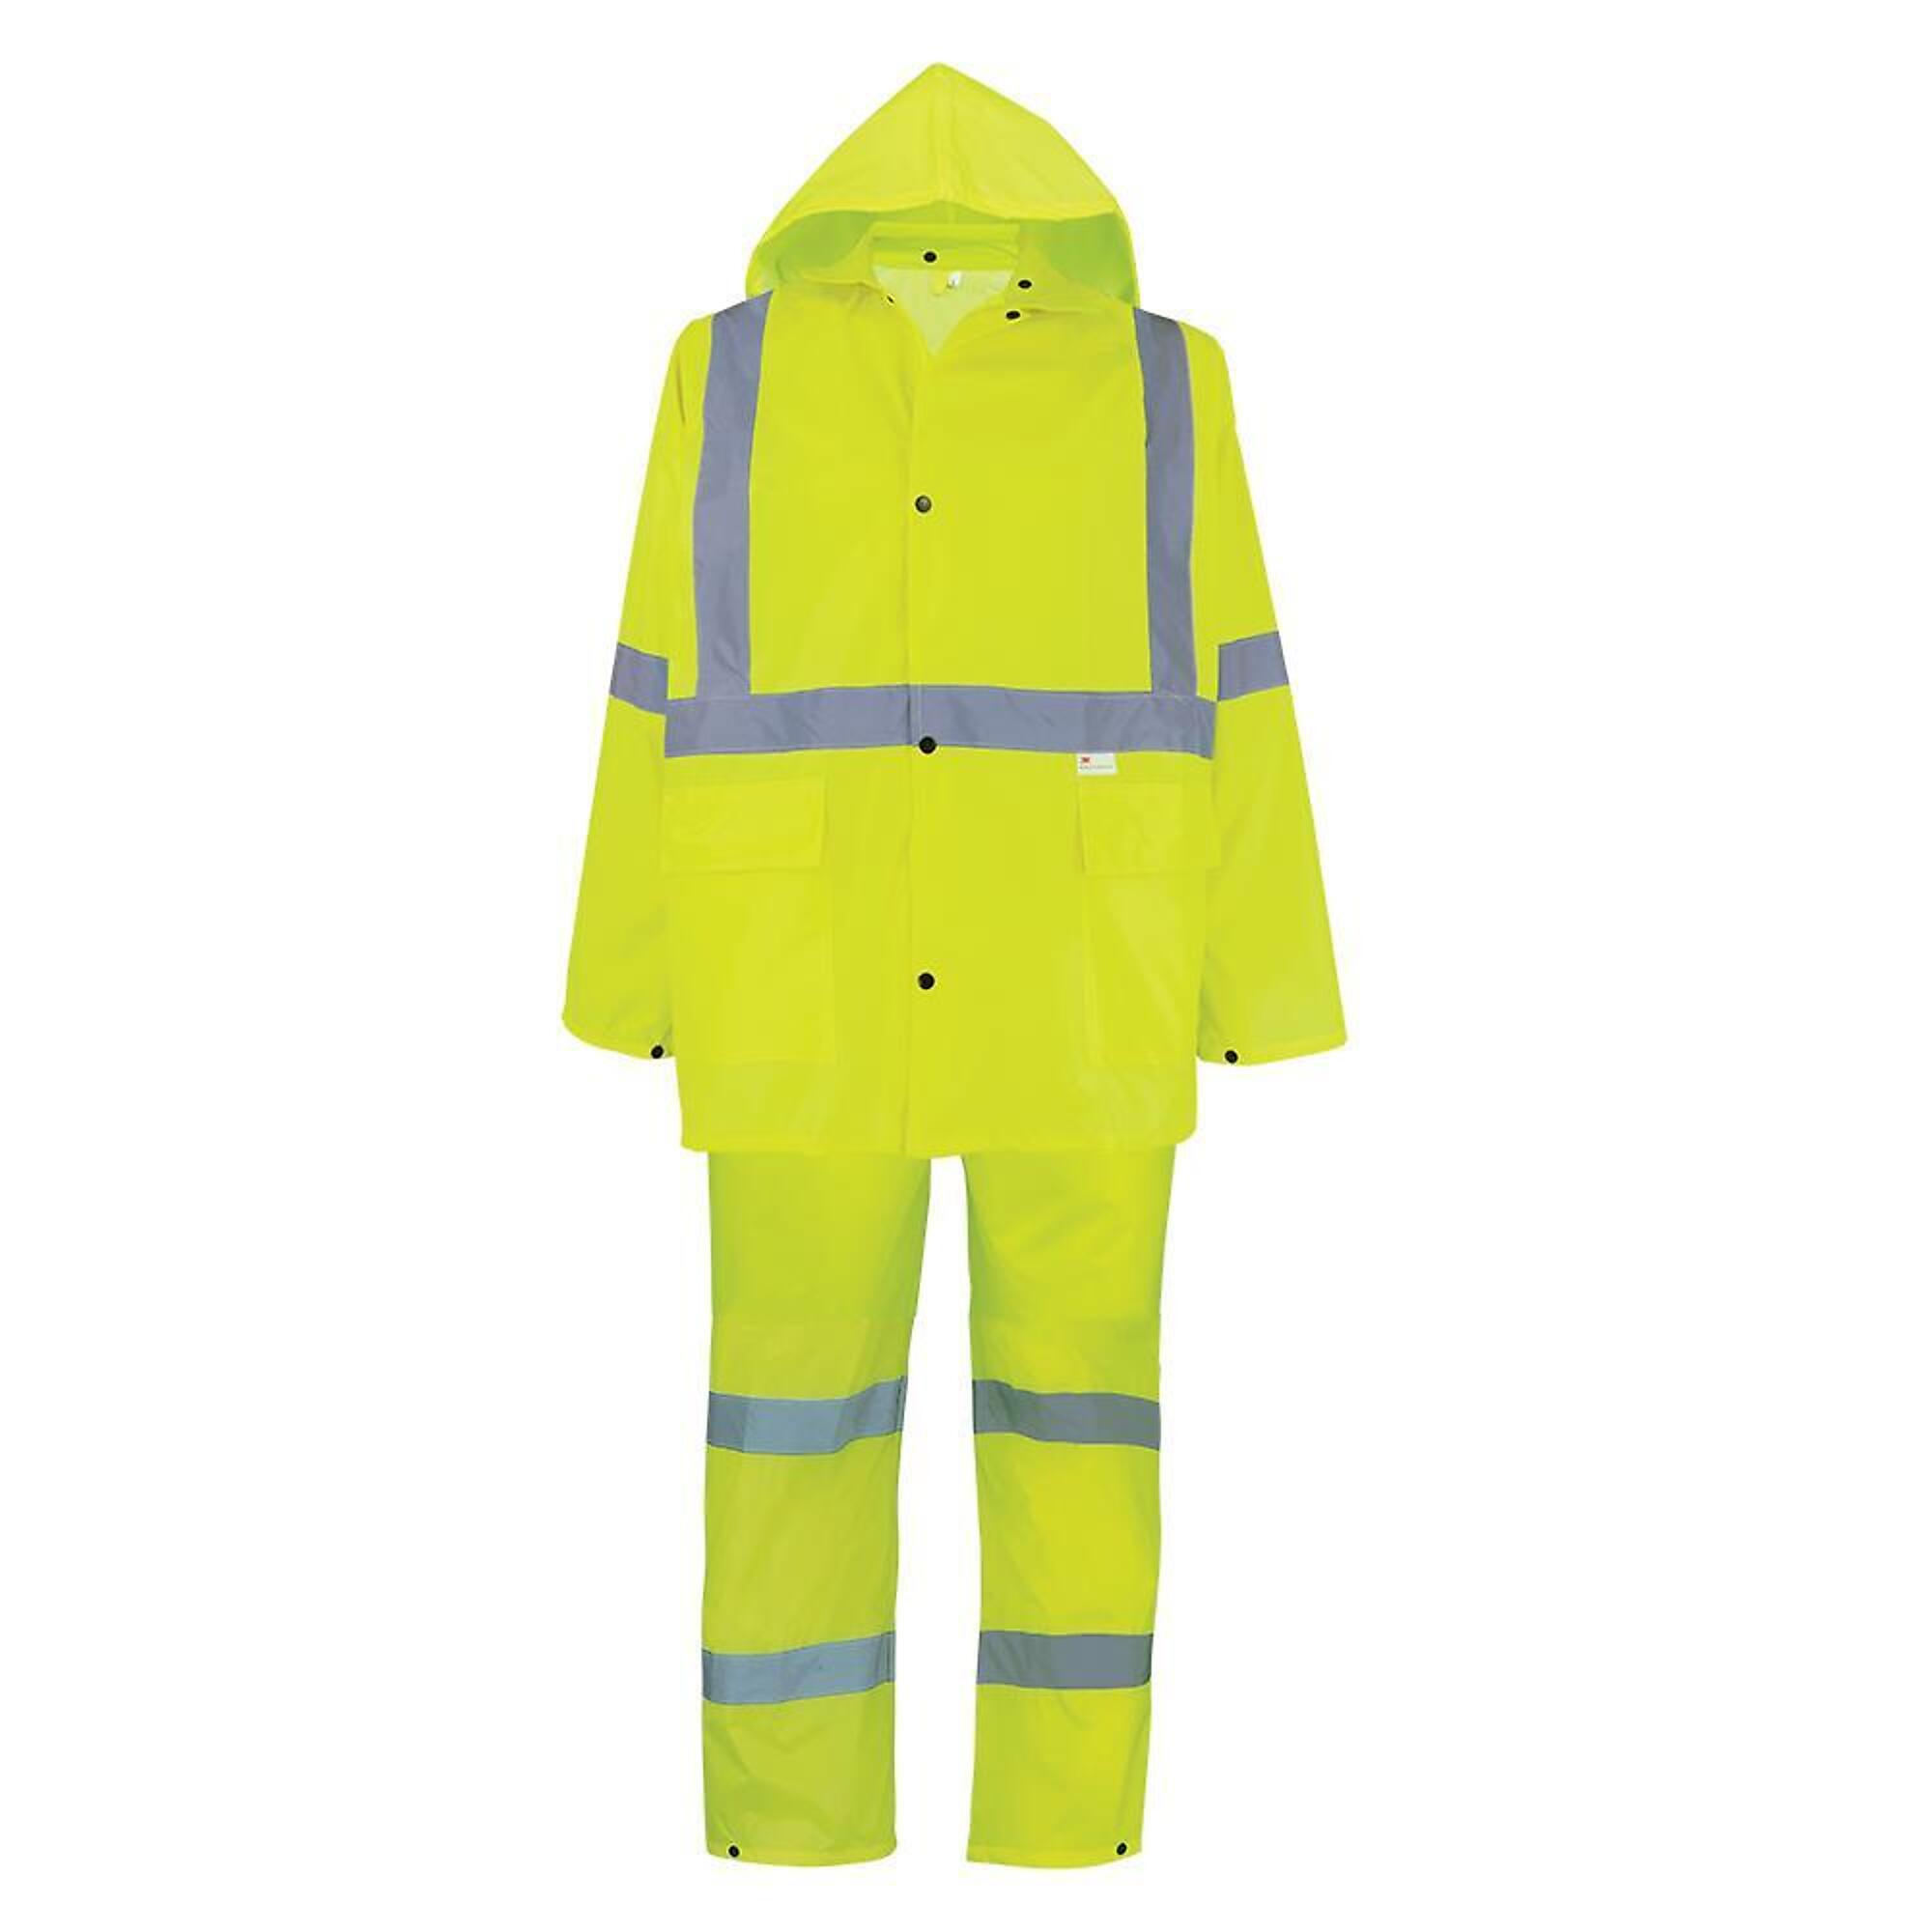 FrogWear, HV Yellow/Green, Class 3 Three-Piece Rain Suit, Size 3XL, Color High-Visibility Yellow/Green, Model GLO-8000-3XL